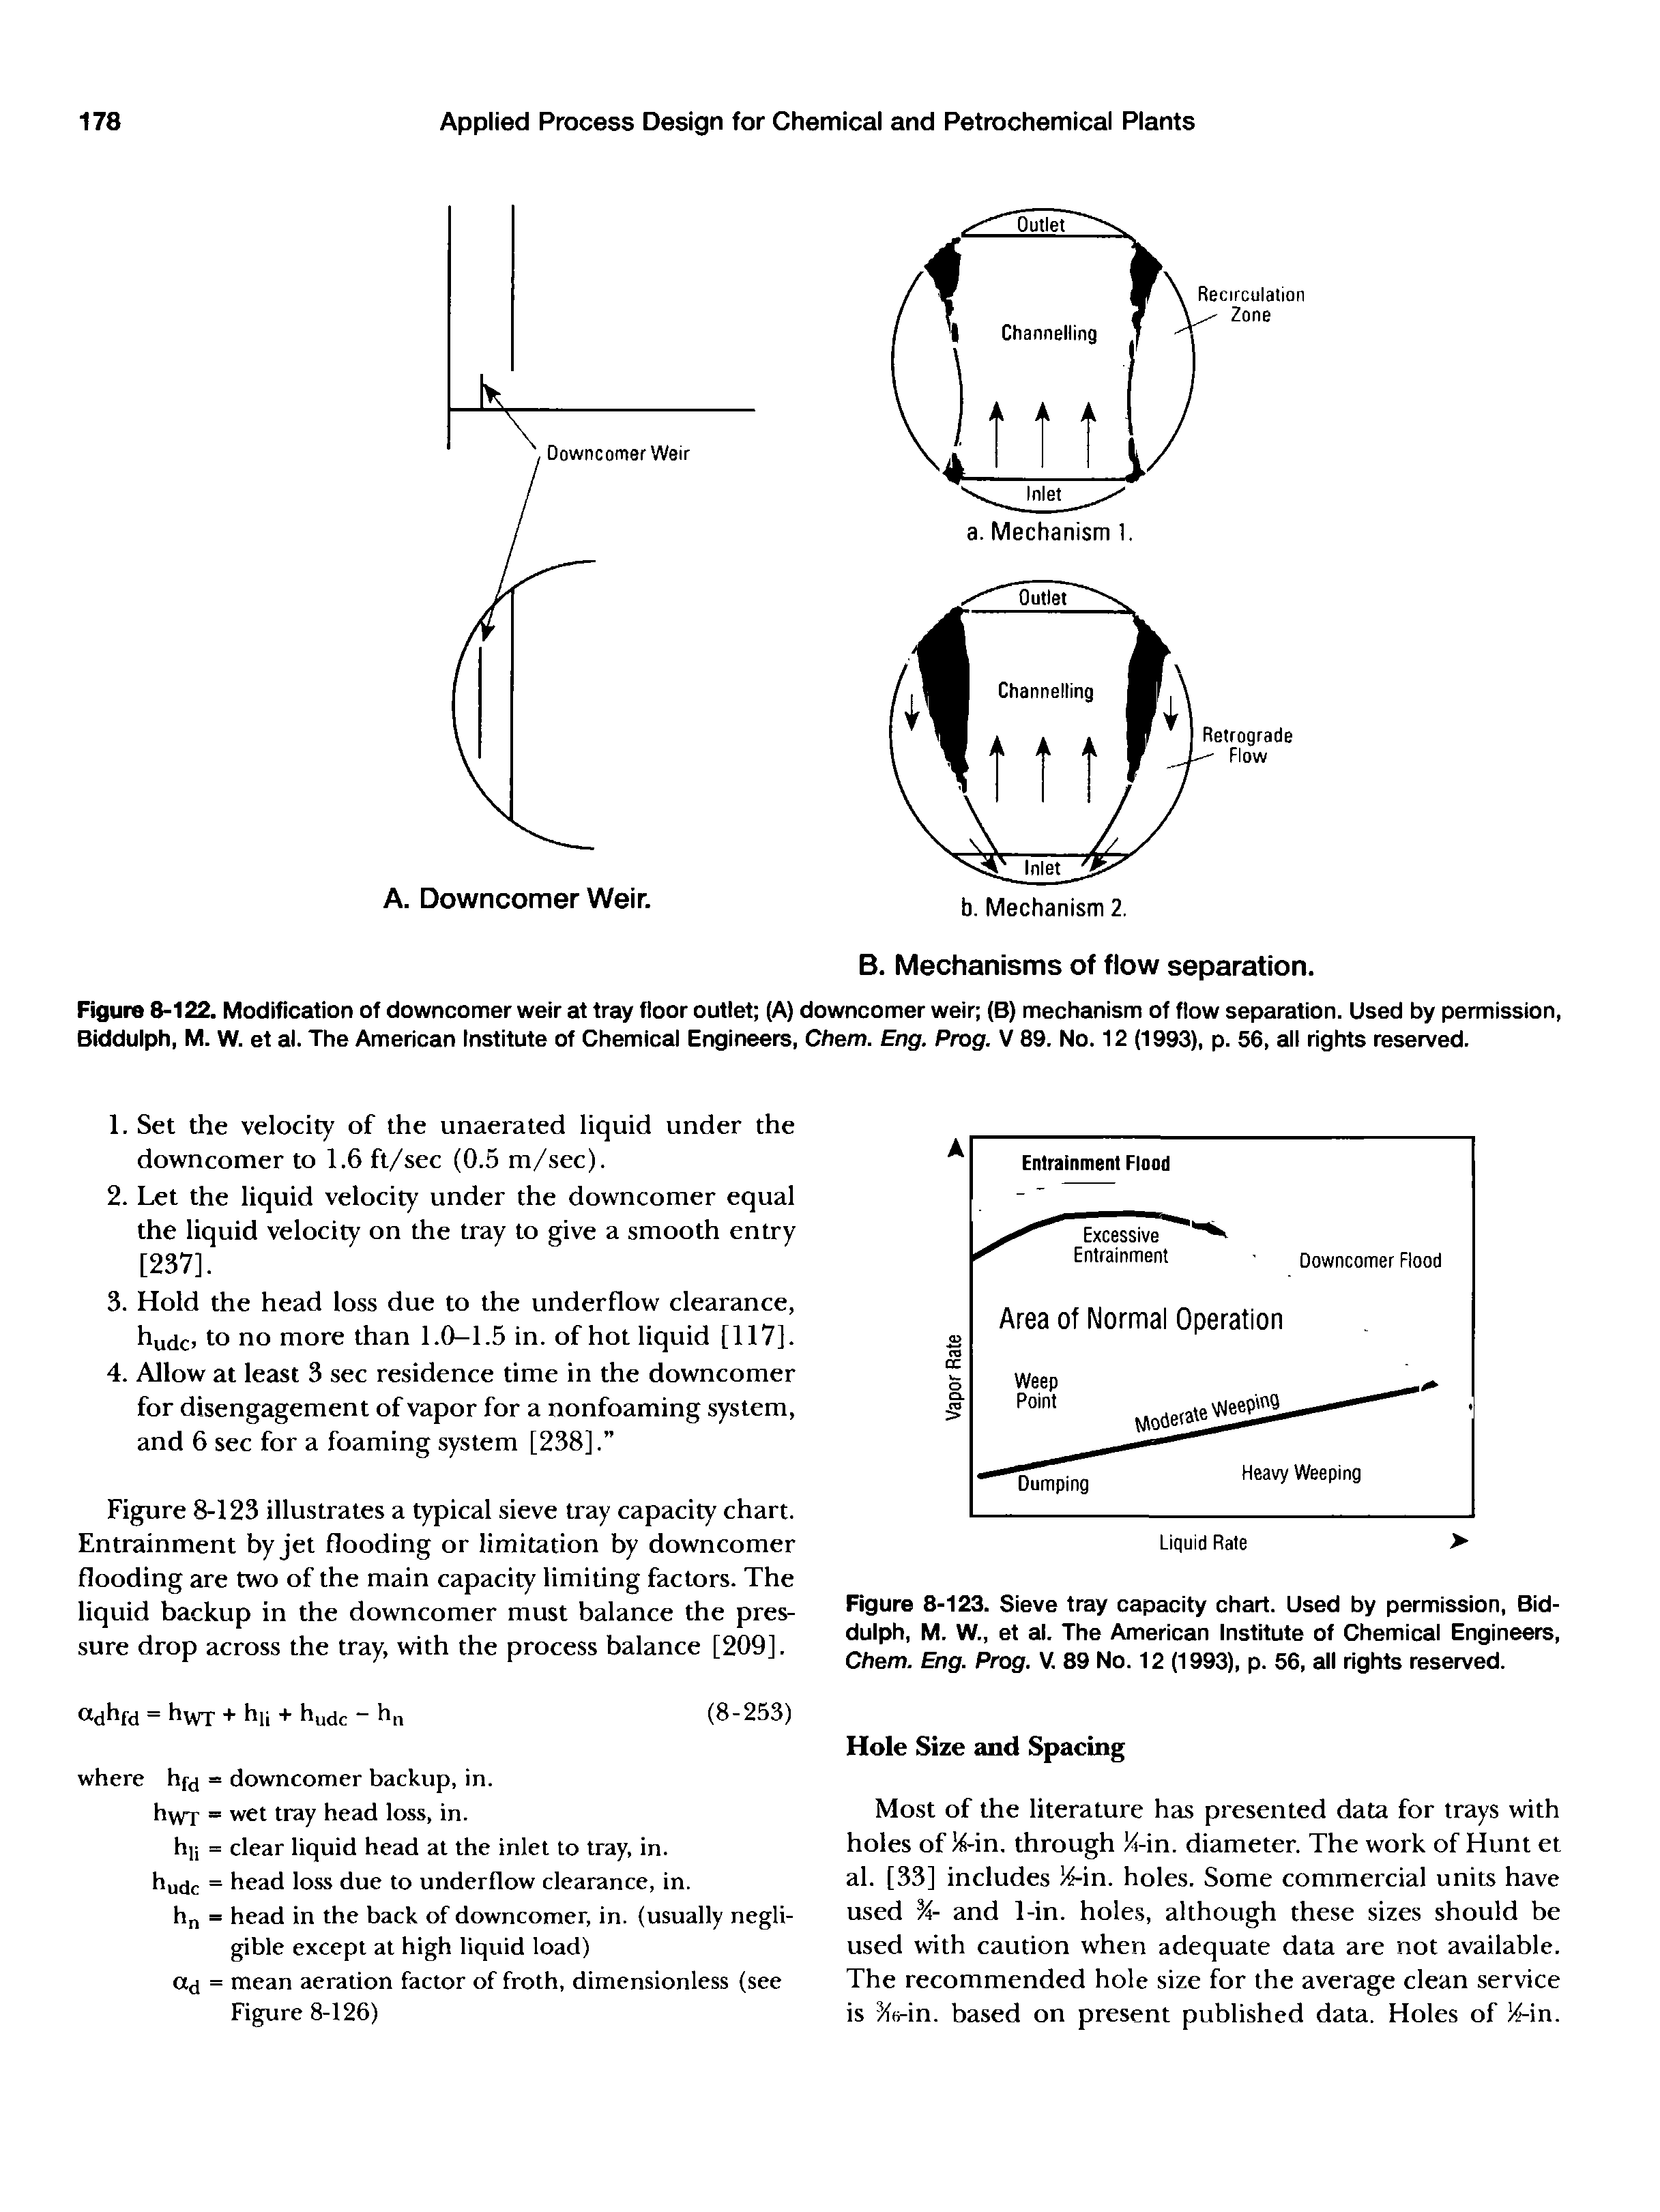 Figure 8-122. Modification of downcomer weir at tray floor outlet (A) downcomer weir (B) mechanism of flow separation. Used by permission, Biddulph, M. W. et al. The American Institute of Chemical Engineers, Chem. Eng. Prog. V 89. No. 12 (1993), p. 56, all rights reserved.